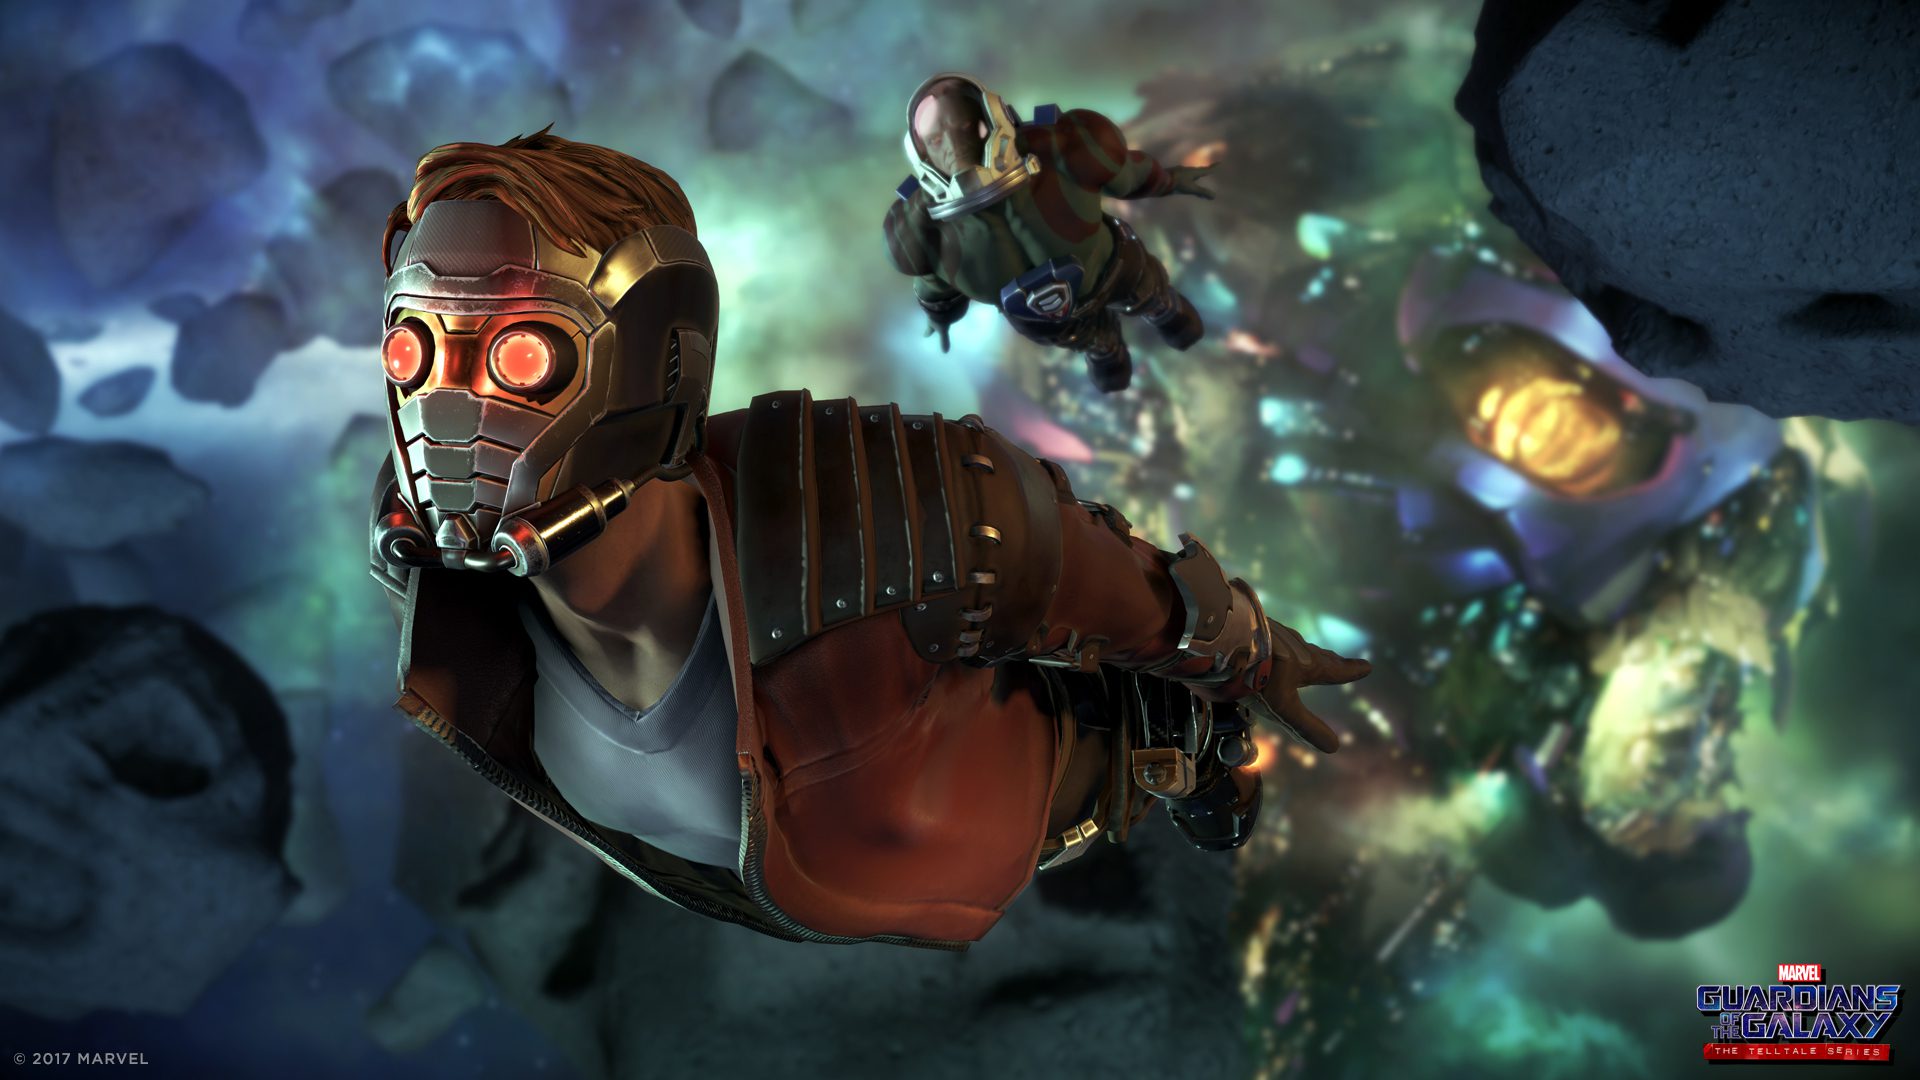 Telltale Games and Marvel Give 1st Look & Cast Details for ‘Marvel’s Guardians of the Galaxy: The Telltale Series’